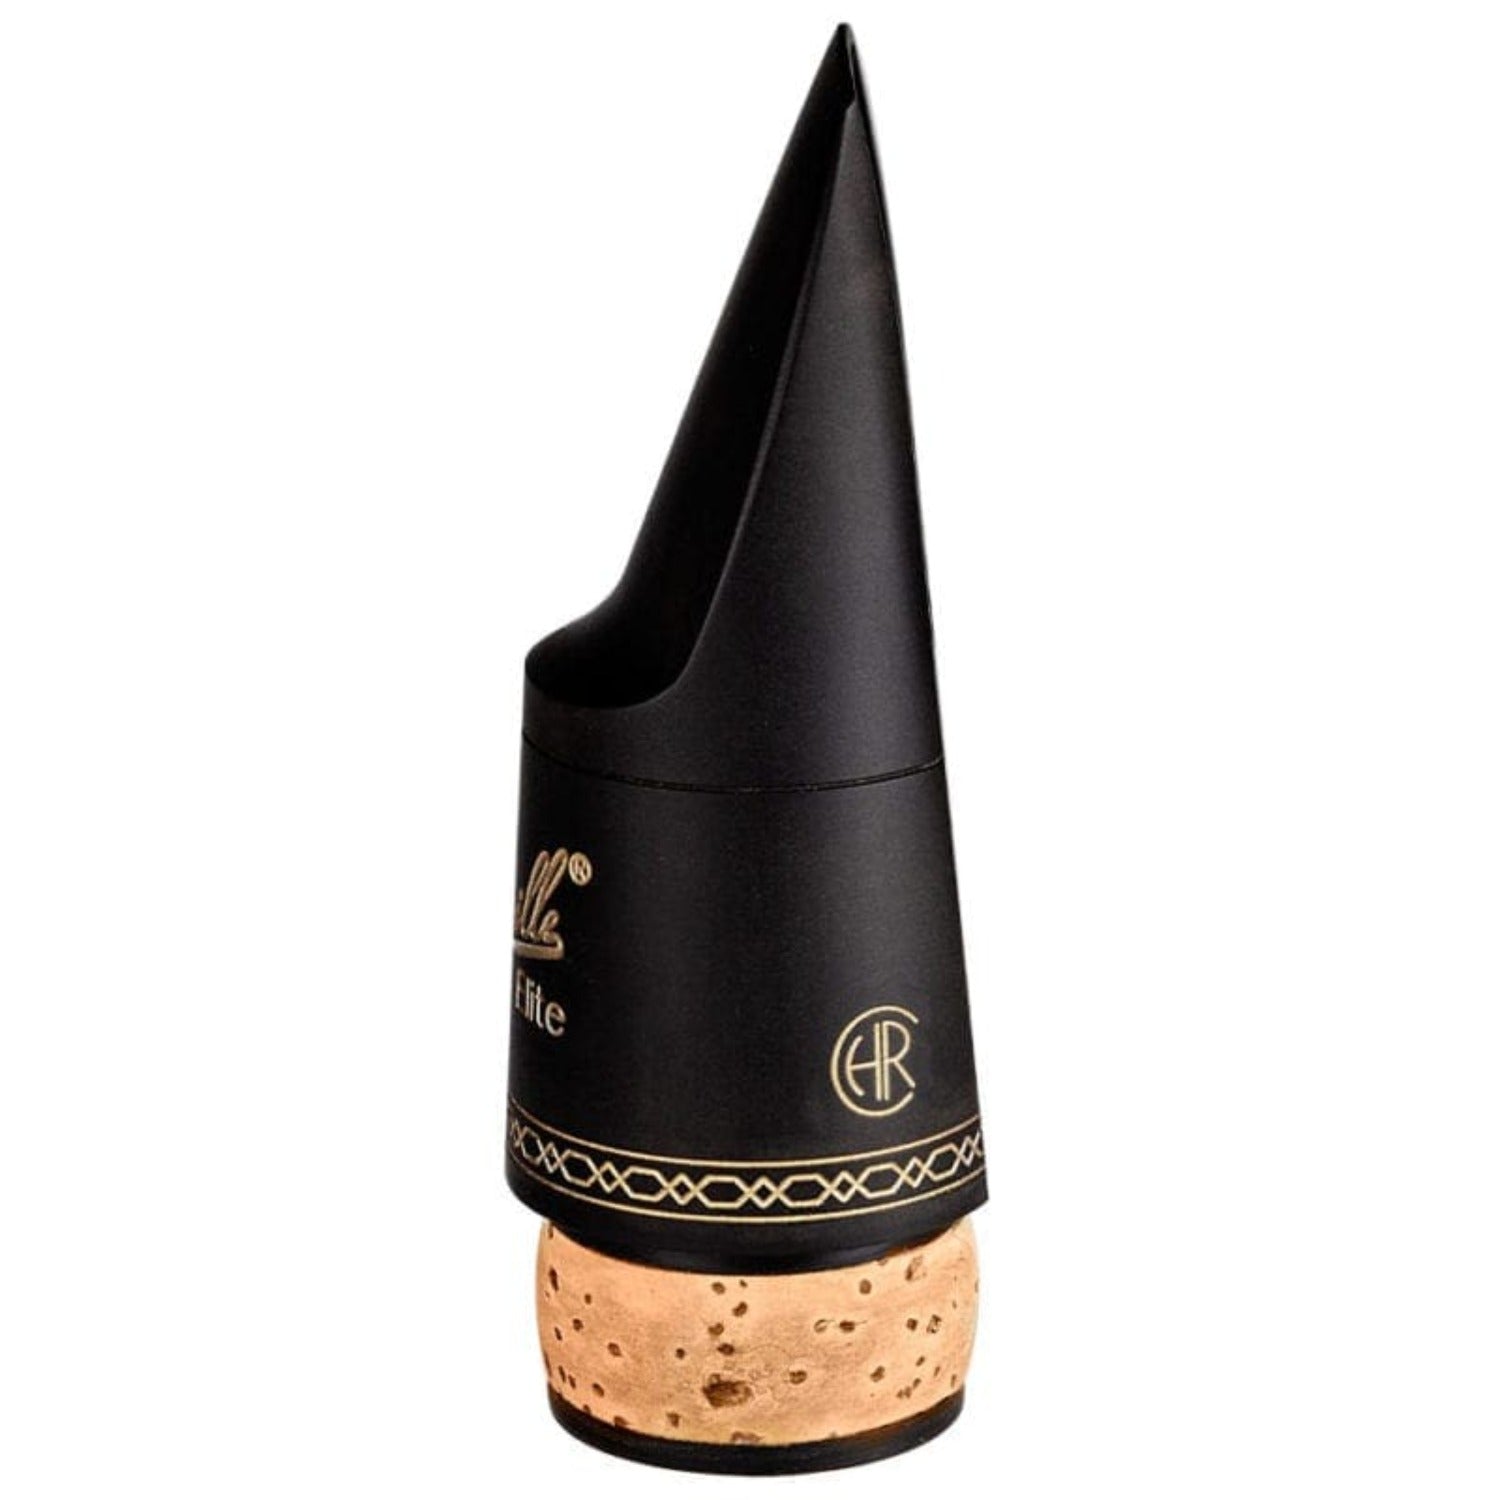 left side view of Chedeville Elite bass clarinet mouthpiece showing portion of front engraving, gold border around the bottom, and CHR logo